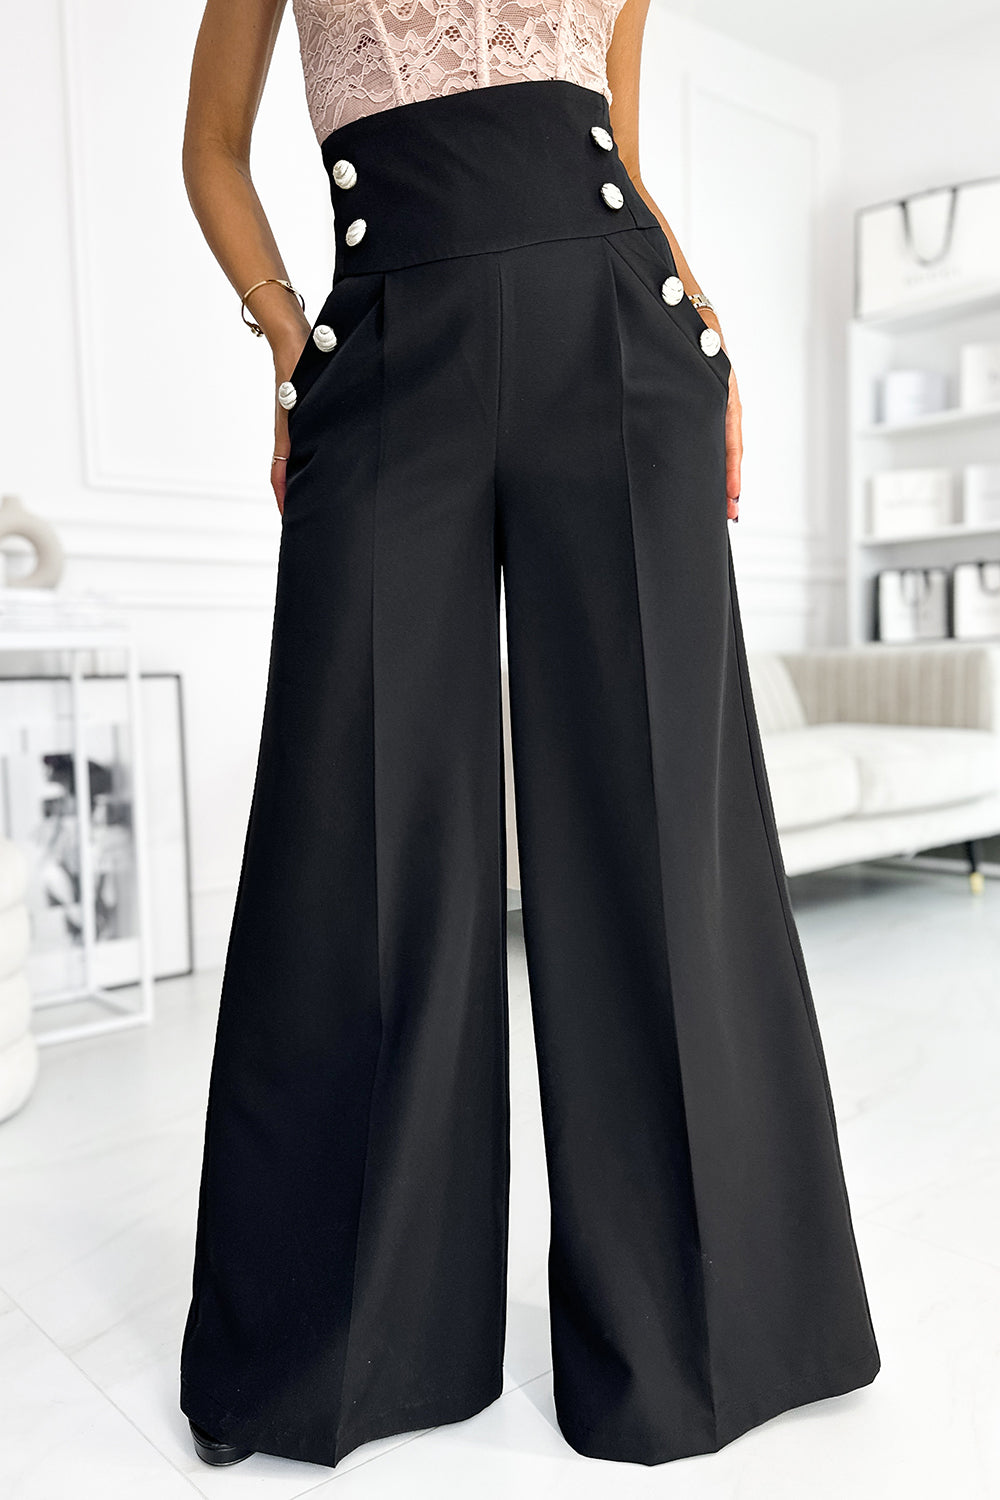 18341-2-496-1 Elegant wide pants with high waist and golden buttons - black-2